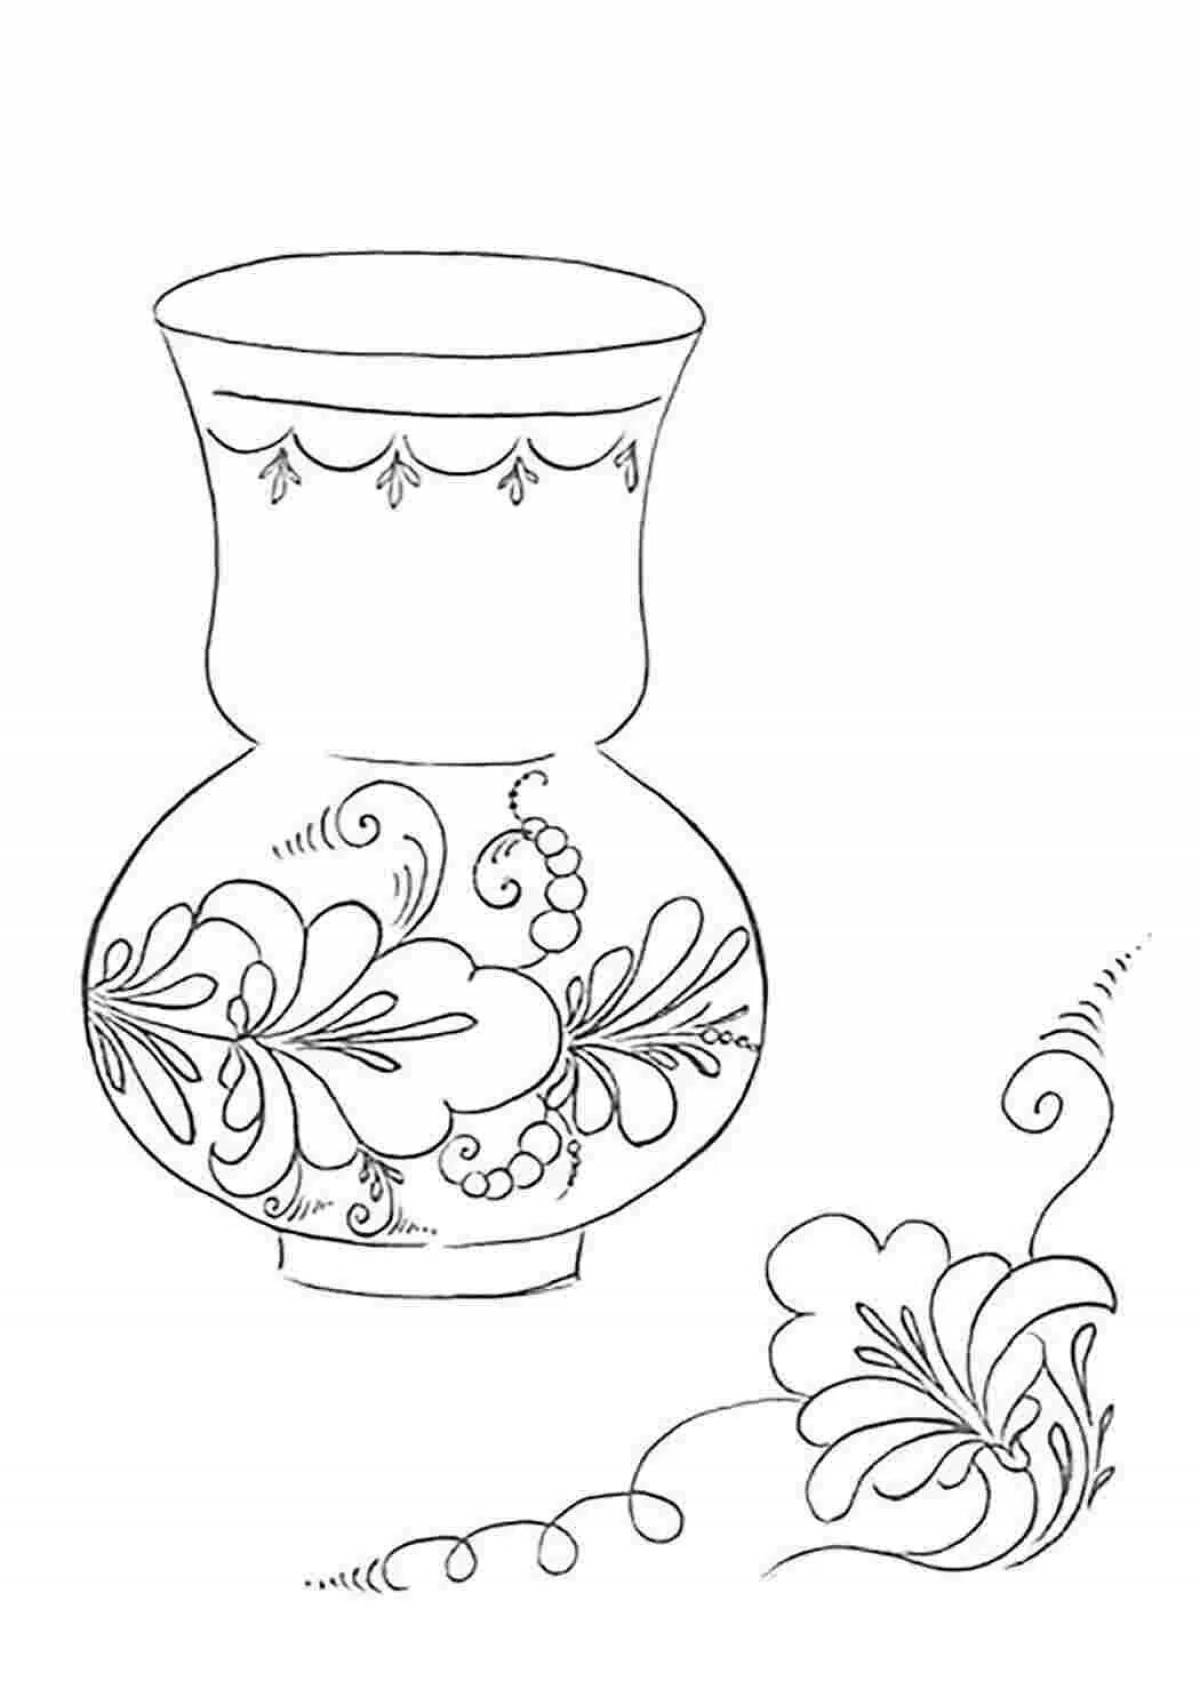 Coloring page wonderful Gzhel dishes